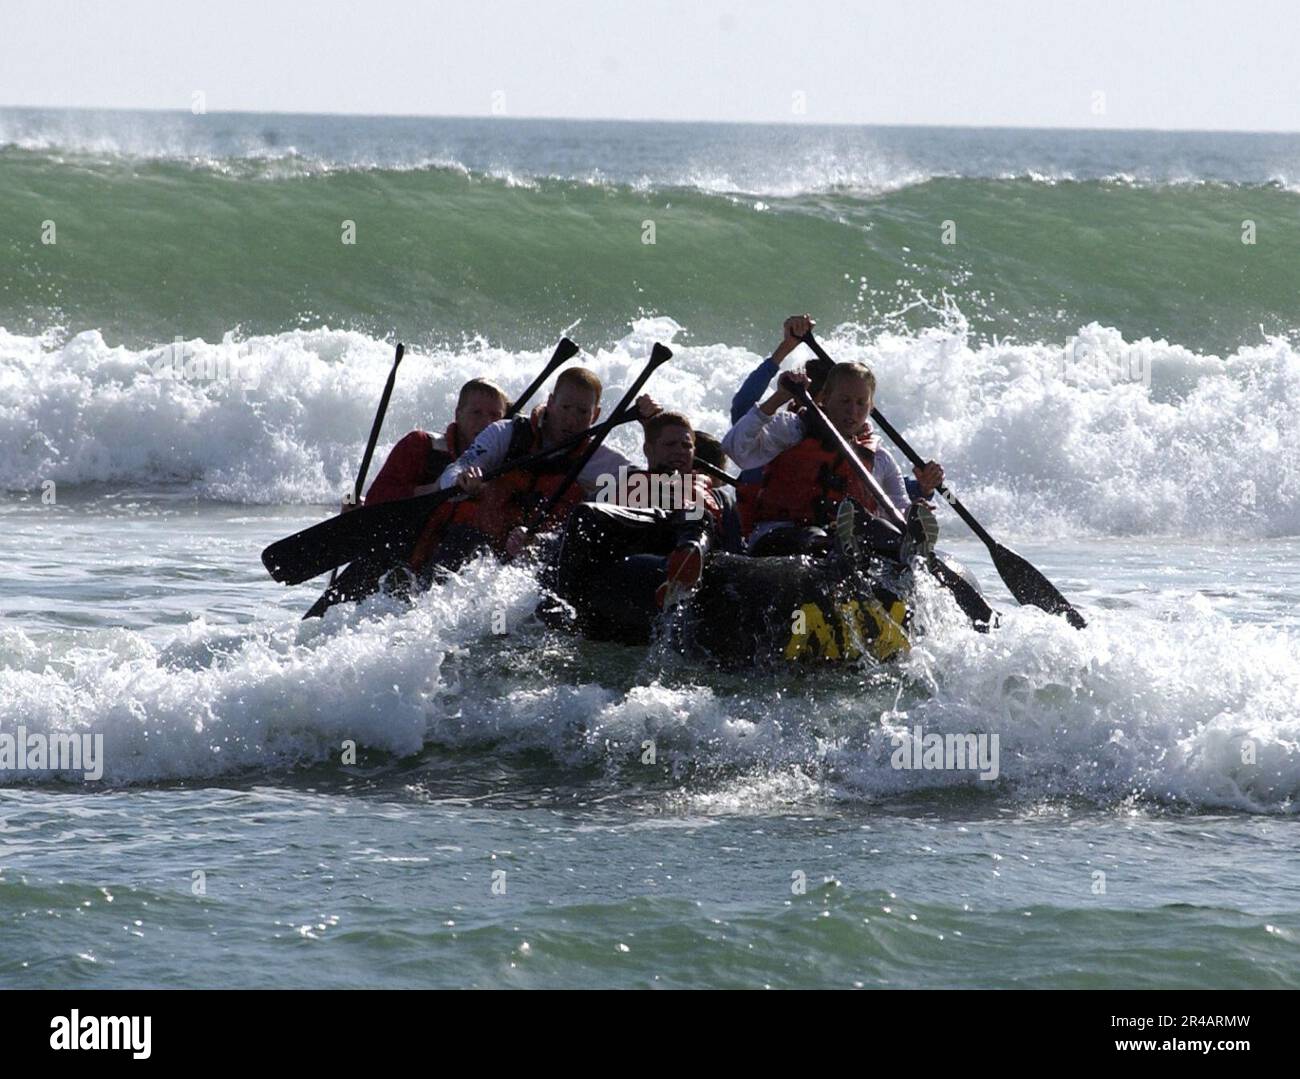 US Navy  U.S. Olympic Team triathletes maneuver a rubber raft in the surf during a day of training with Navy SEALs (Sea, Air, Land) on board Naval Special Warfare Center, San Diego, Calif. Stock Photo